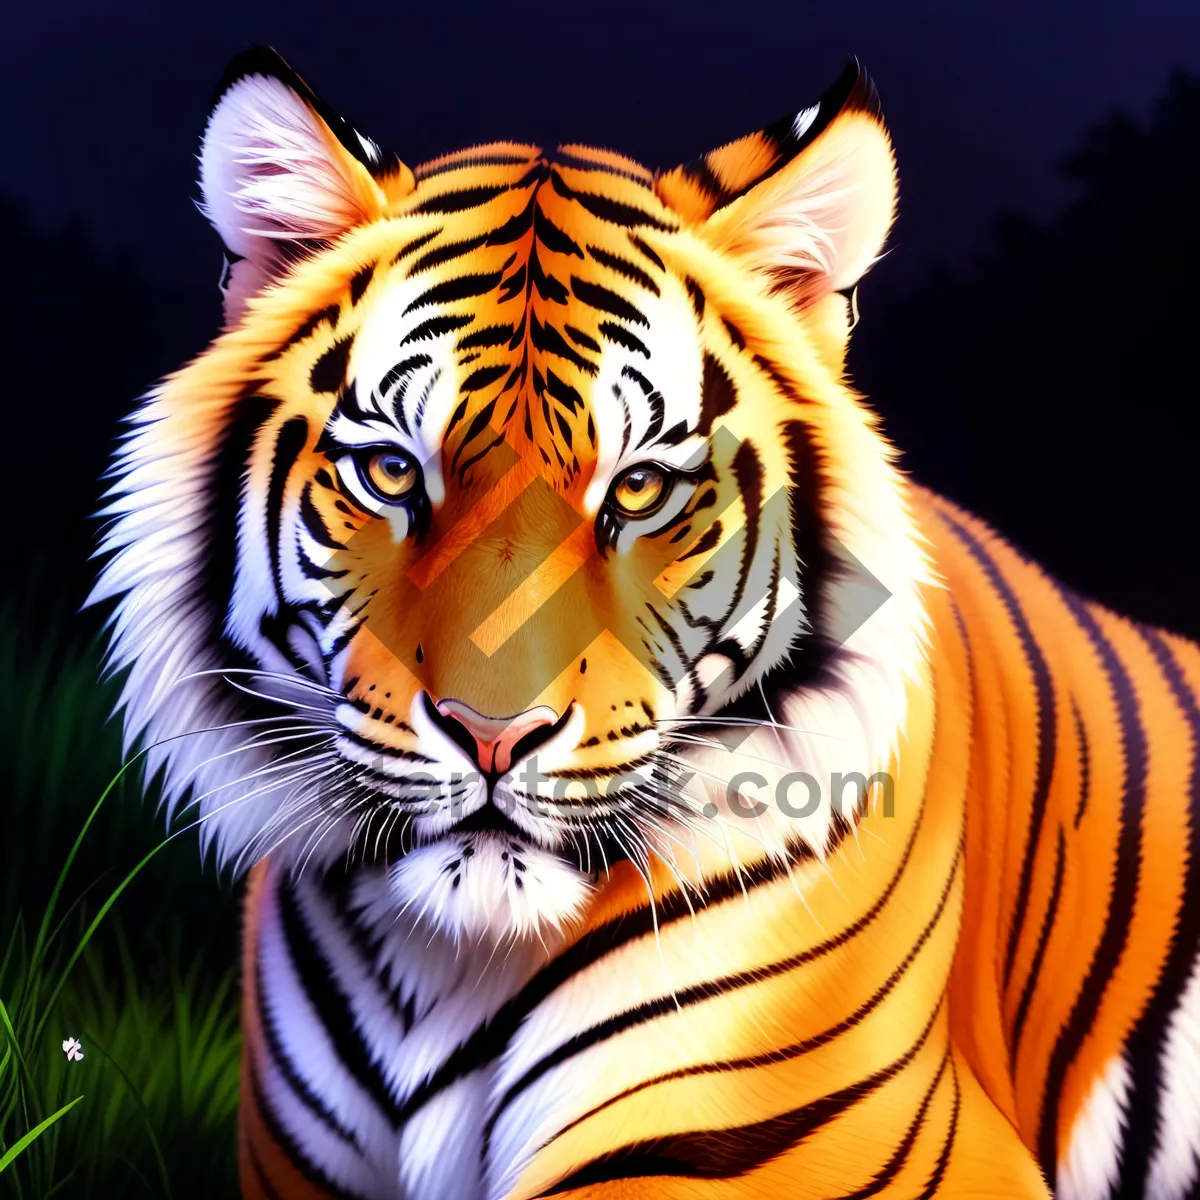 Picture of Striped Wildlife Feline in Jungle: The Ferocious Tiger